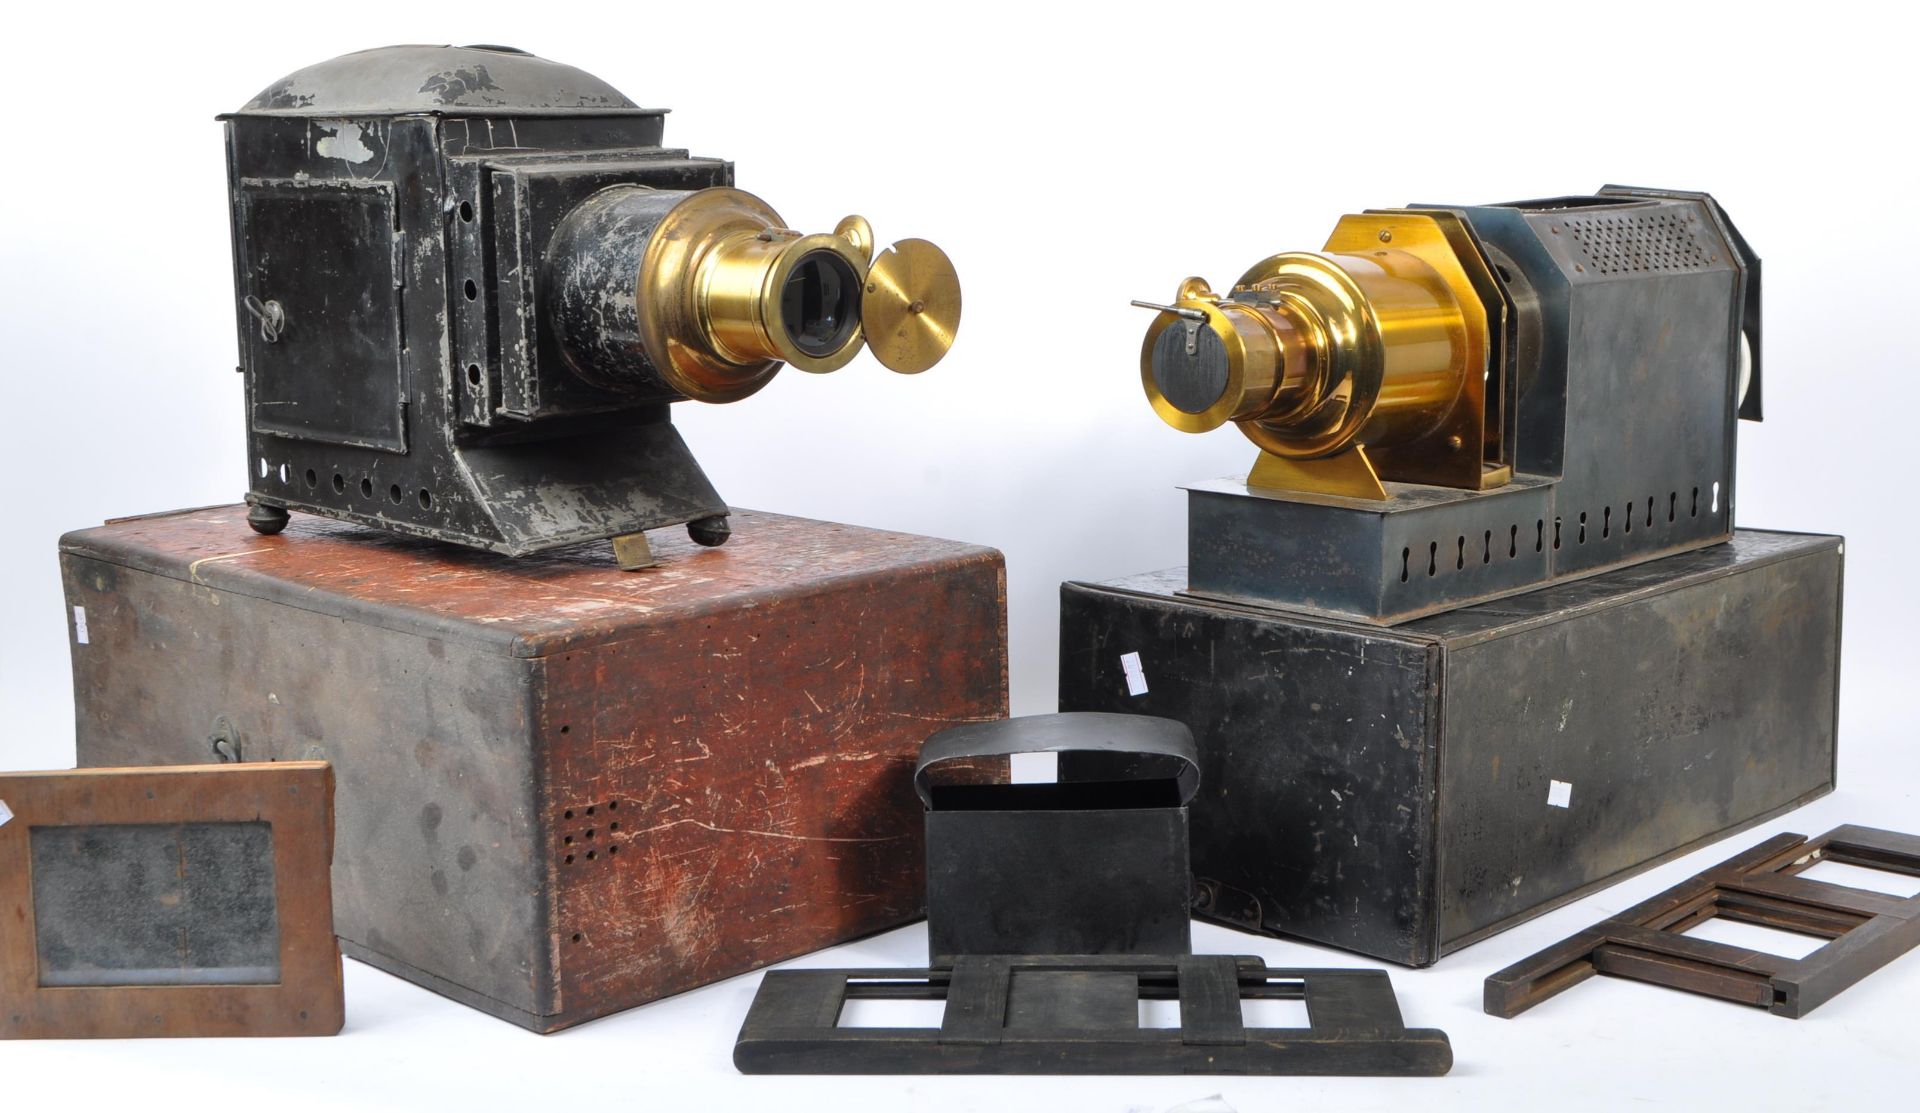 TWO EARLY 20TH CENTURY MAGIC LANTERN SLIDE PROJECTORS